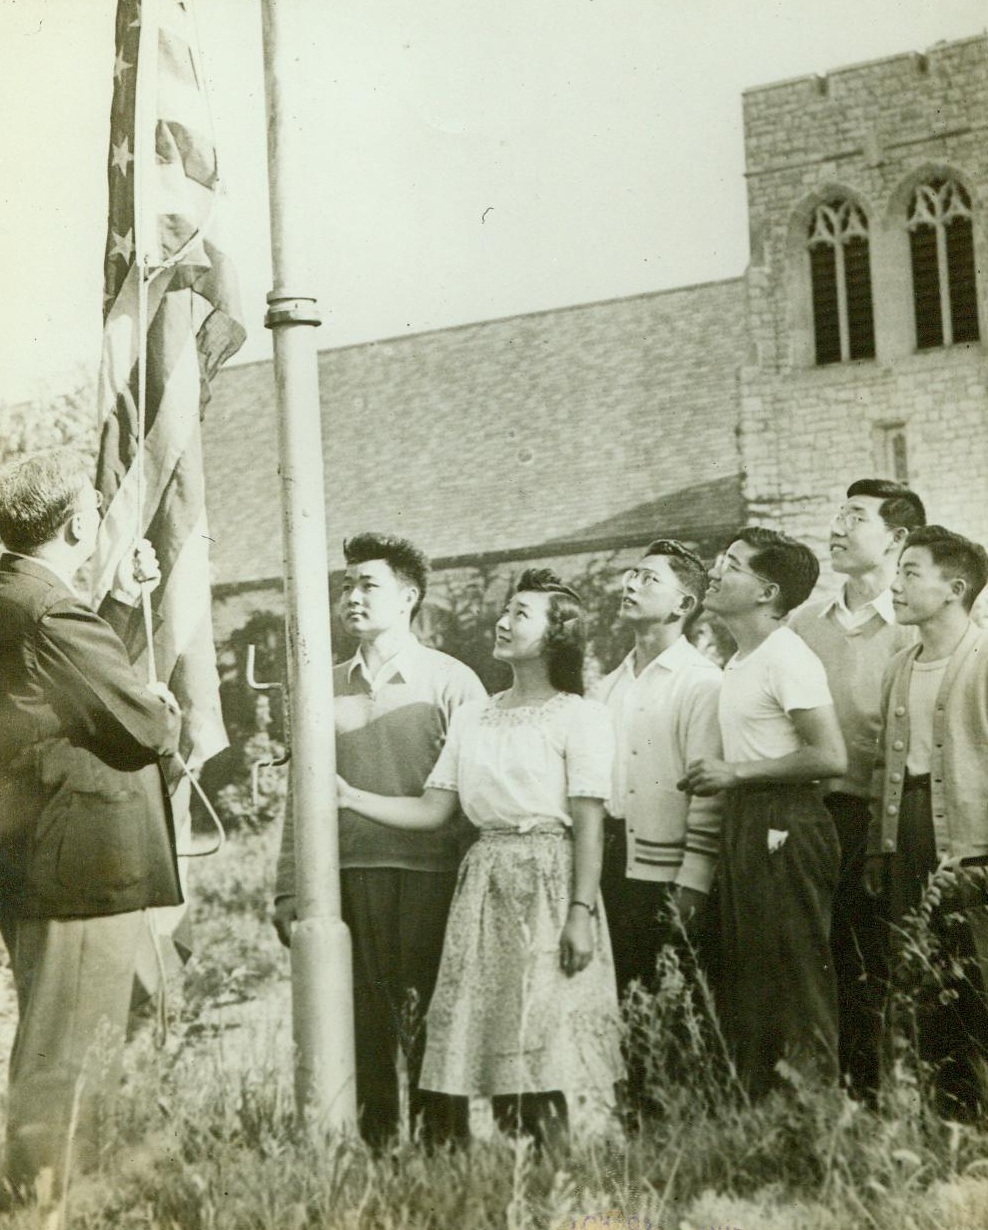 Japanese Students Under Fire, 8/29/1943. Parkville, MO. – American-born Japanese students at Park College, Parkville, Mo., take part in flag raising ceremony and calmly continue studies there despite protests of citizens of Platte County, Mo., who believe they should be interned. Left to Right; W.L. Young, College President; henry Masuda, Toki Kumai, Arthur Kamitsuka, William Yamamoto, Abraham Dohl, and Peter Mori. 8/29/42 (ACME;